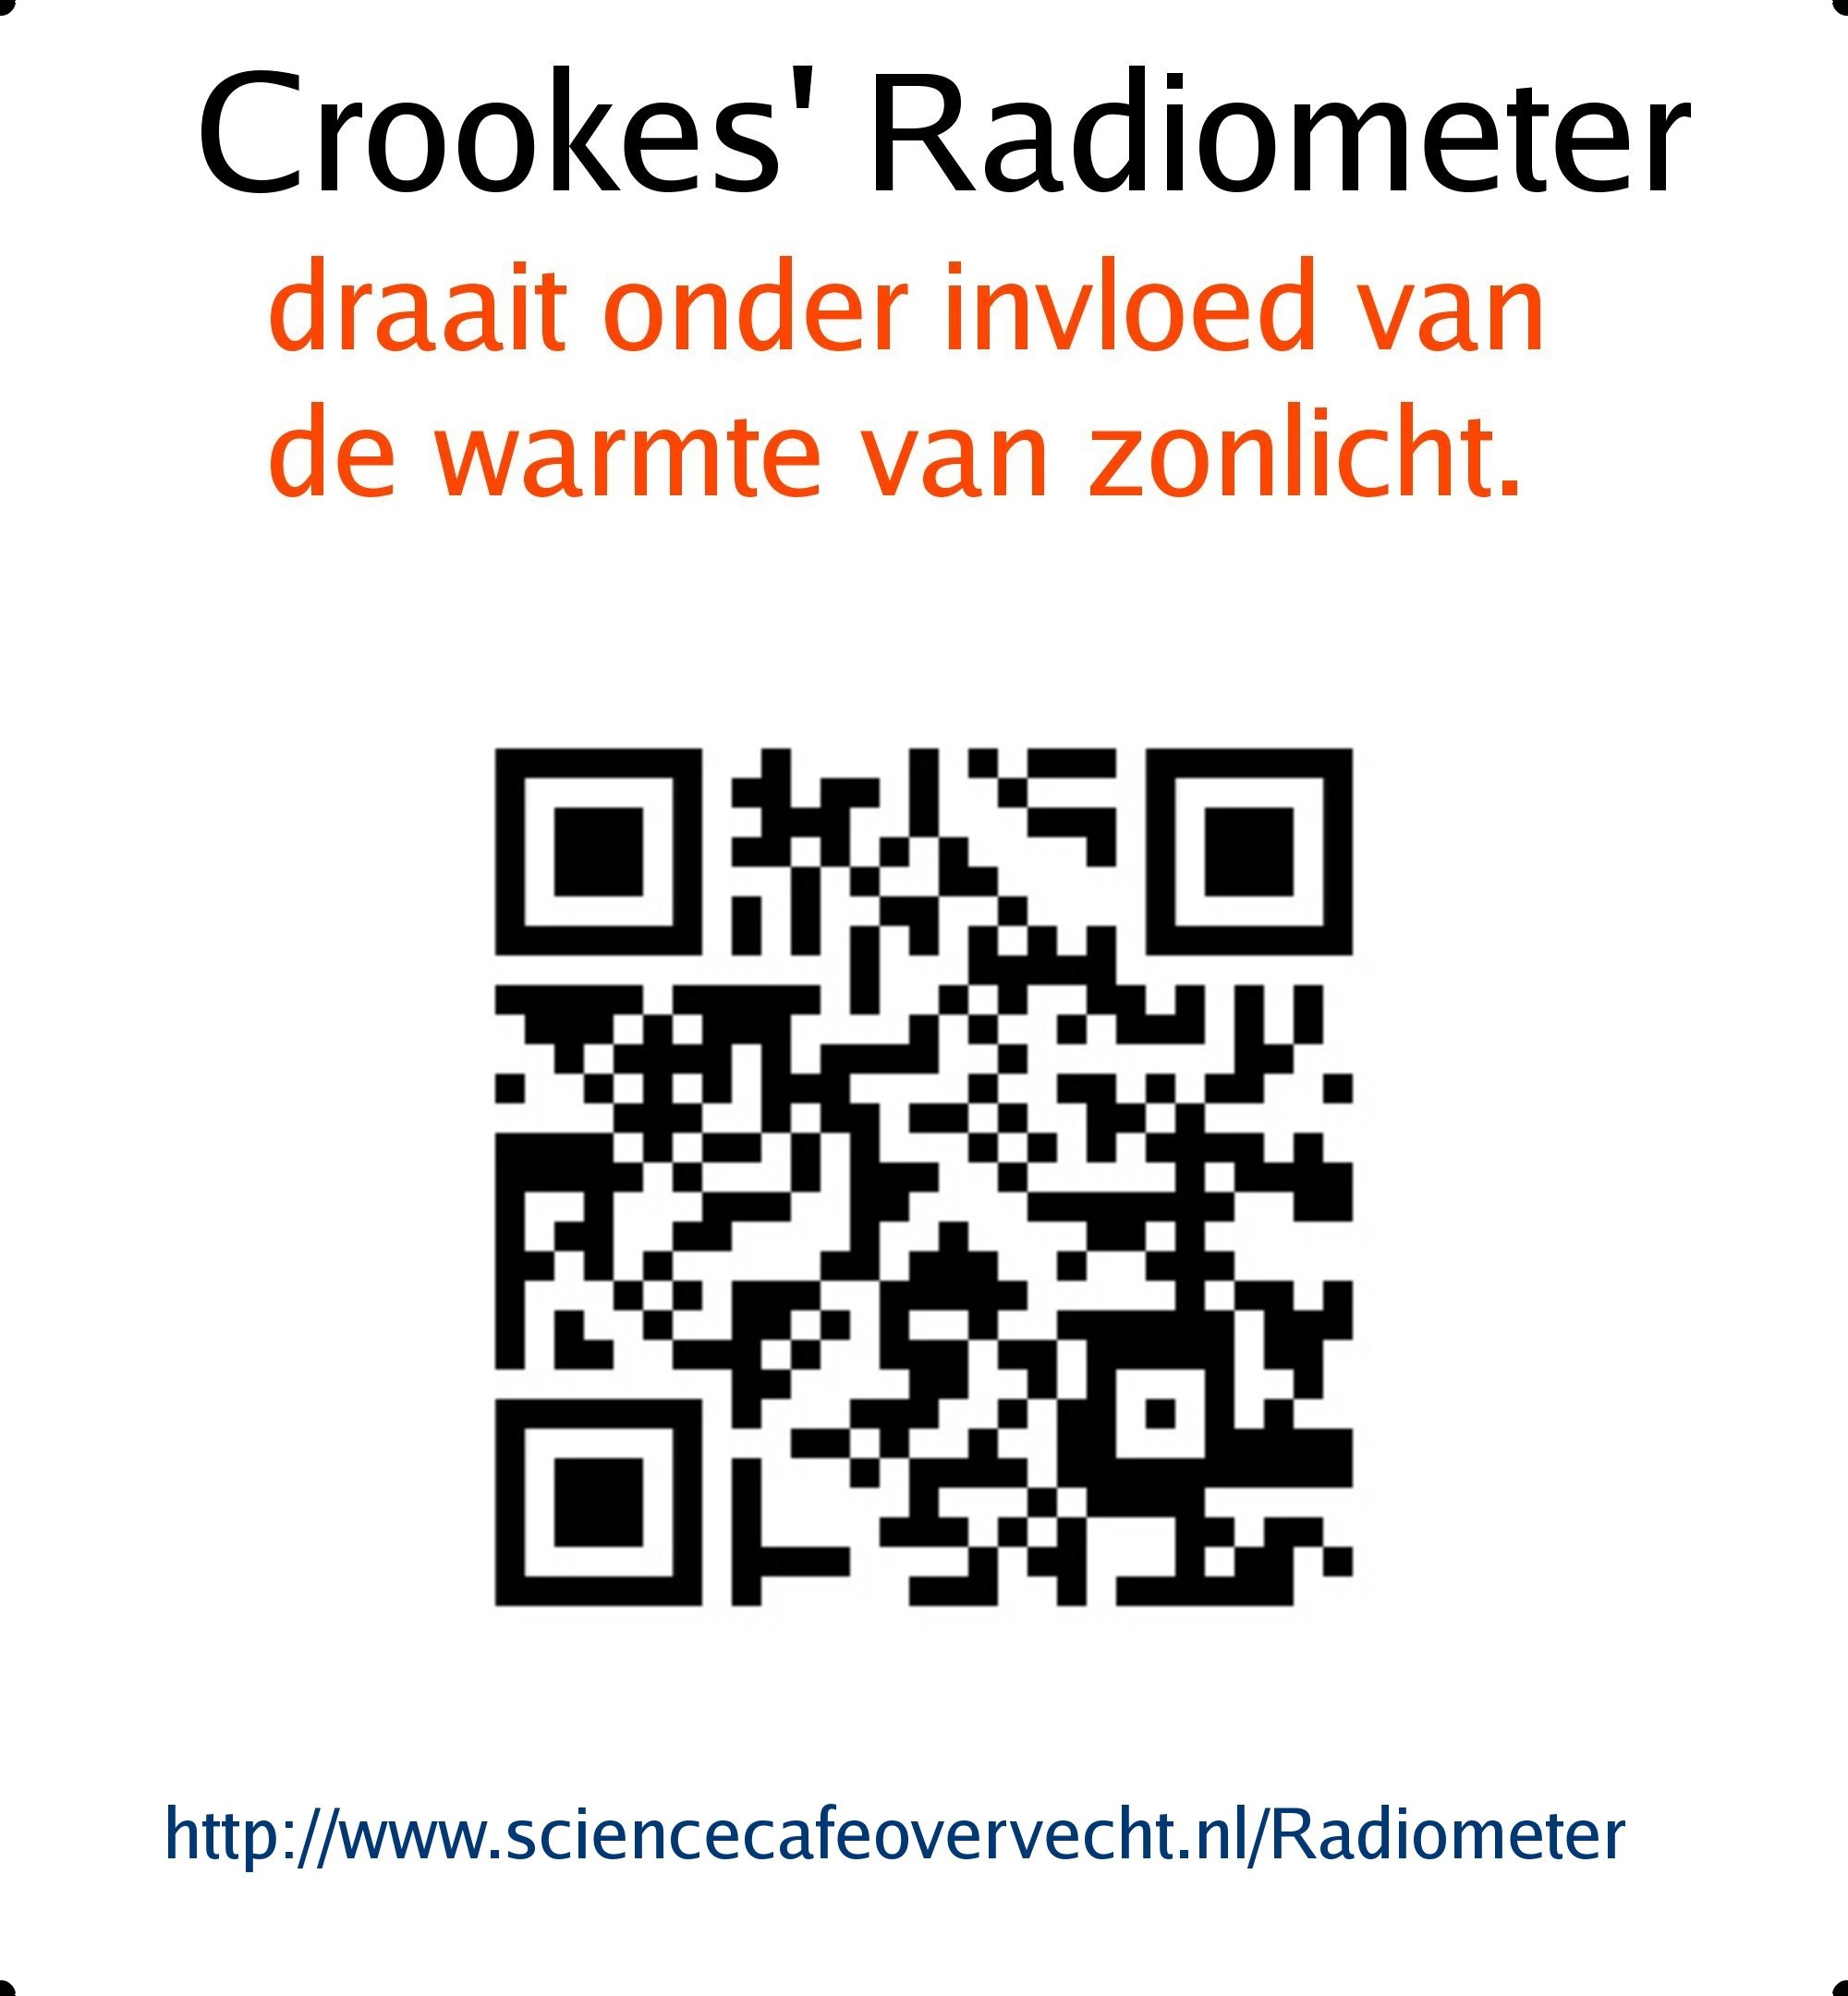 http://www.sciencecafeovervecht.nl/Radiometer/radiometer-label-dotted.jpg